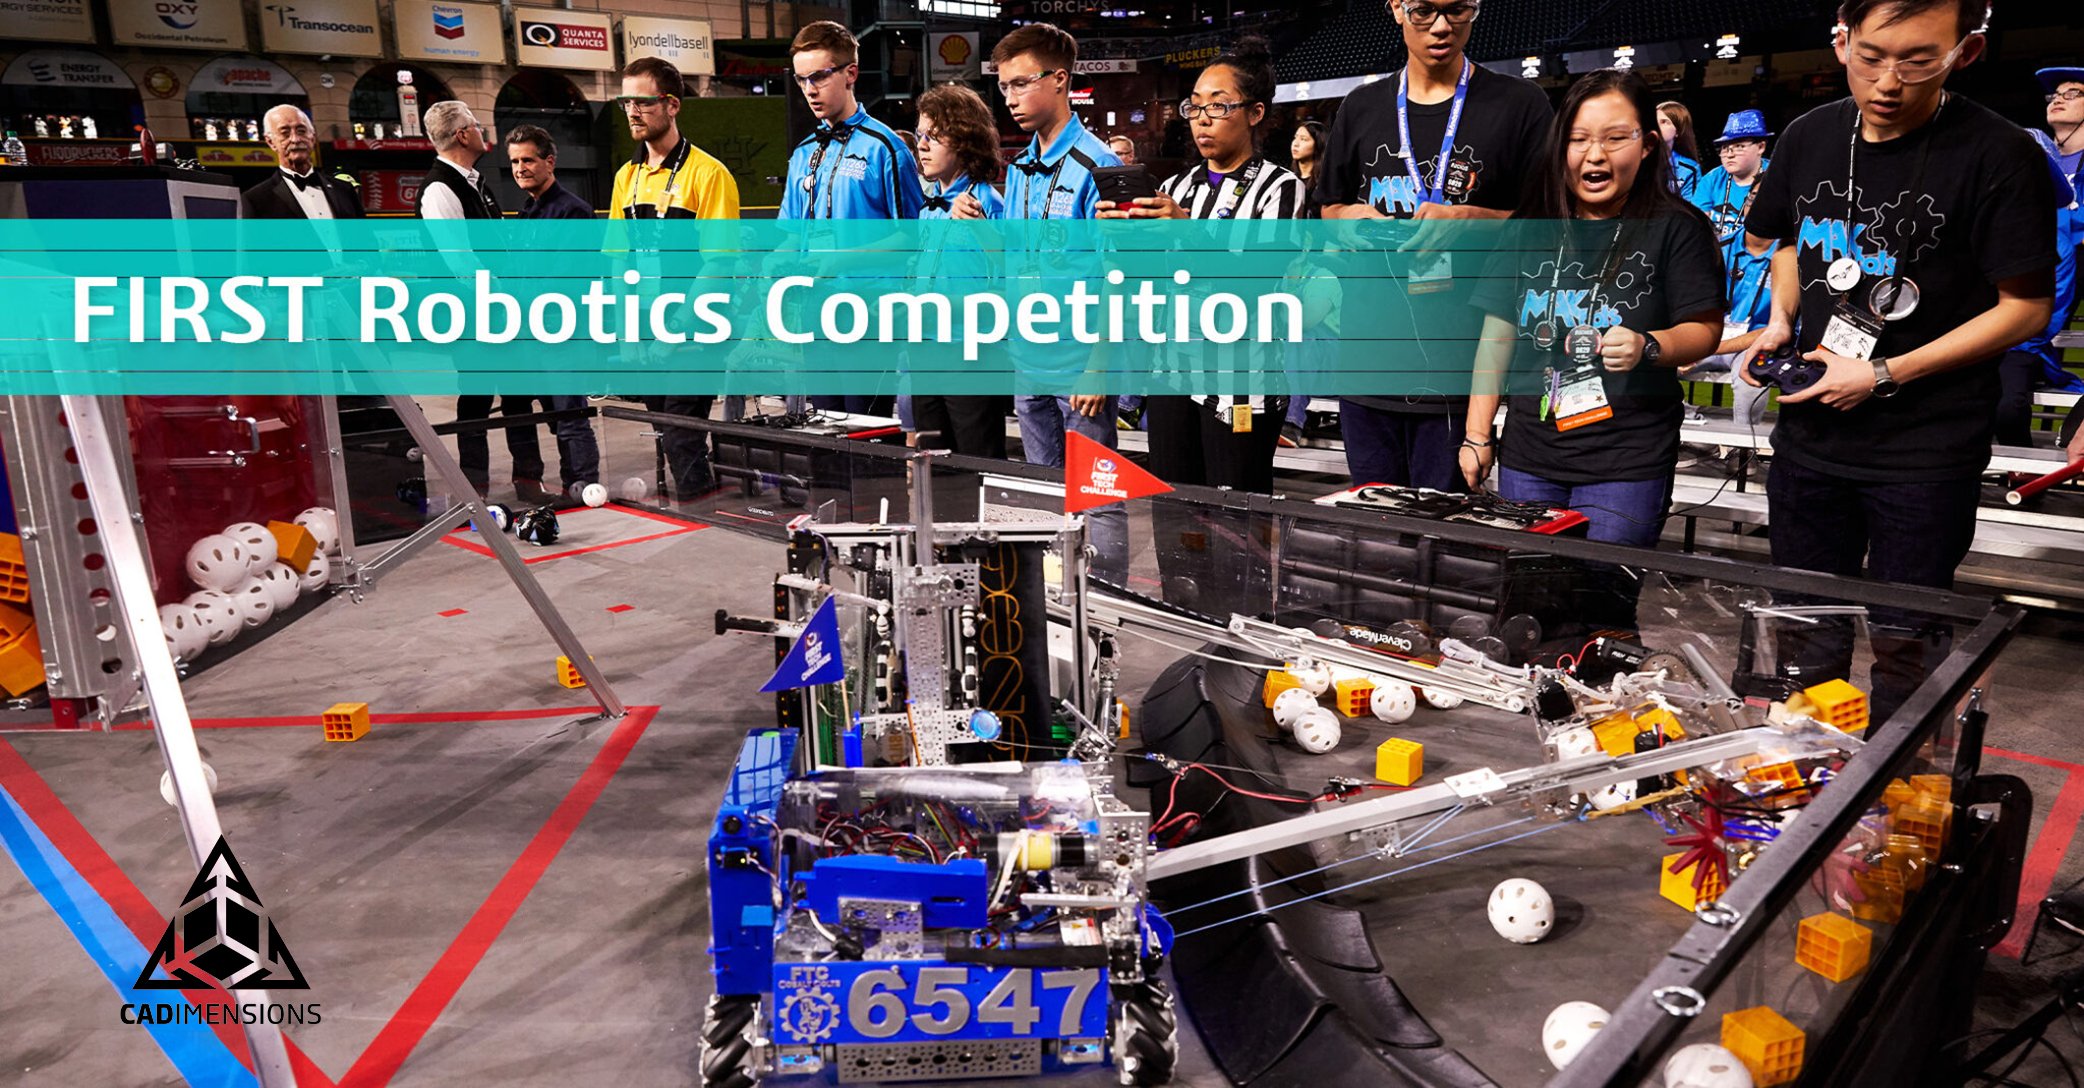 The Importance of the FIRST Robotics Competition